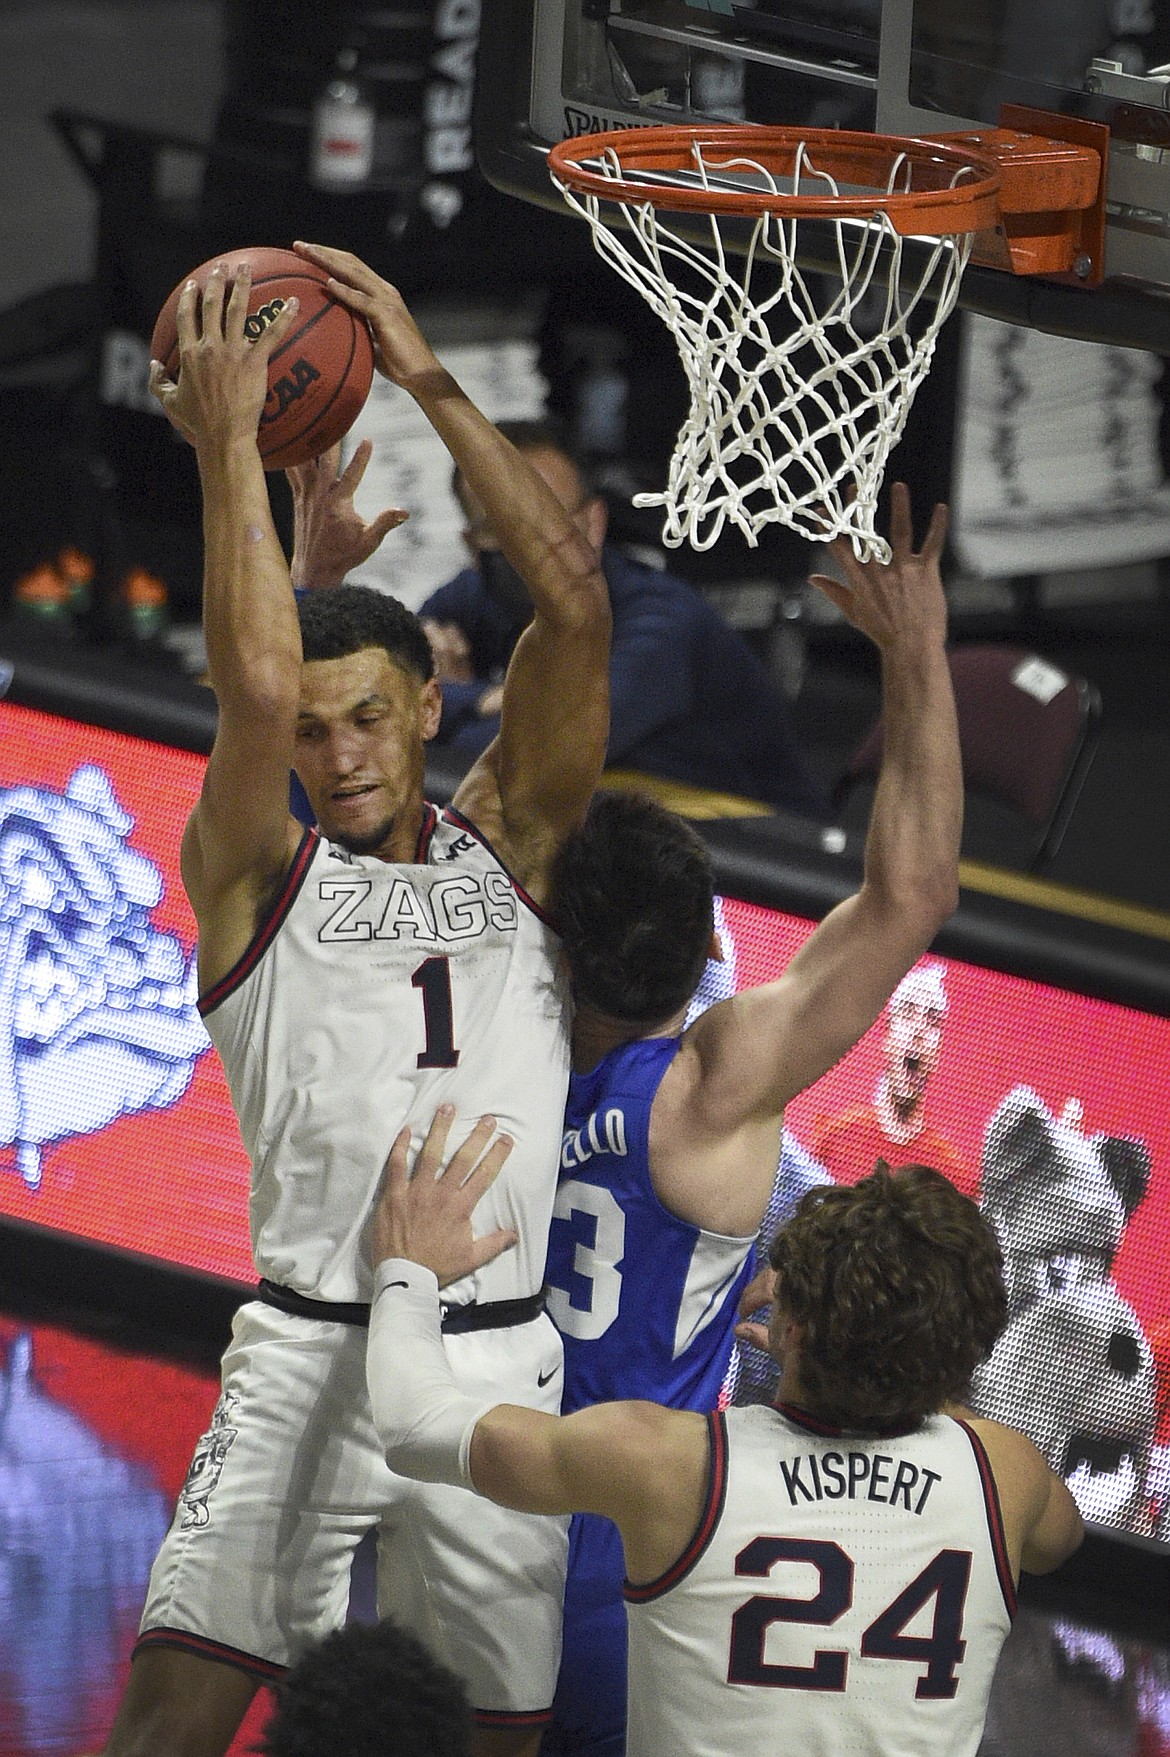 Gonzaga guard Jalen Suggs (1) grabs a rebound against BYU during the first half of the West Coast Conference men’s tournament championship on Tuesday in Las Vegas. (AP Photo/David Becker)